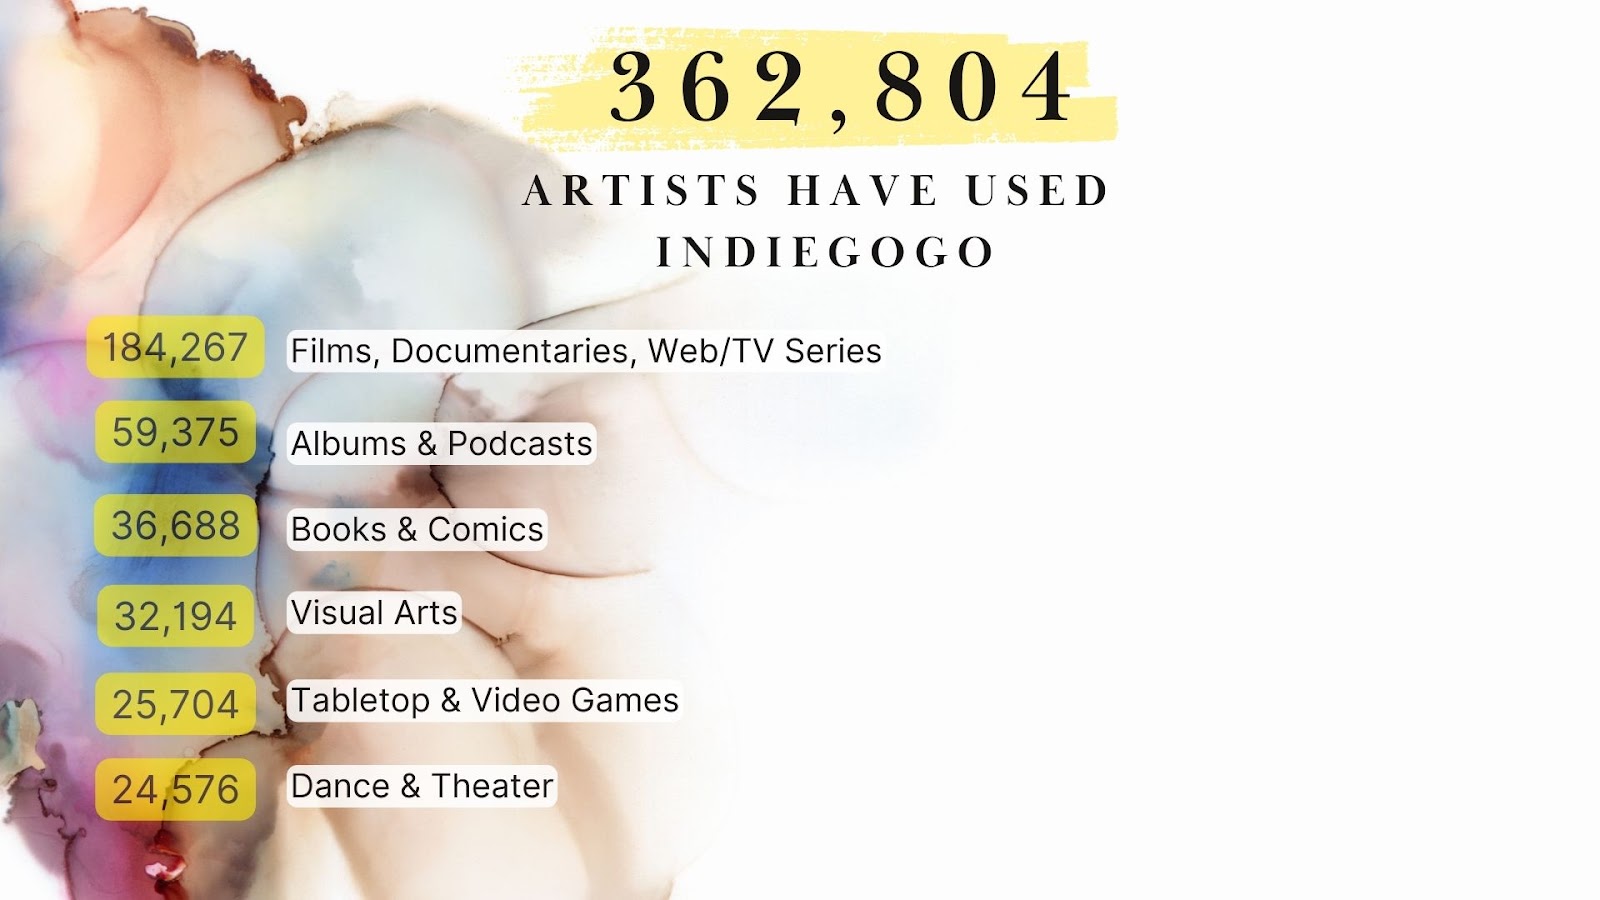 How Many Arts Projects Have Been Funded On Indiegogo?